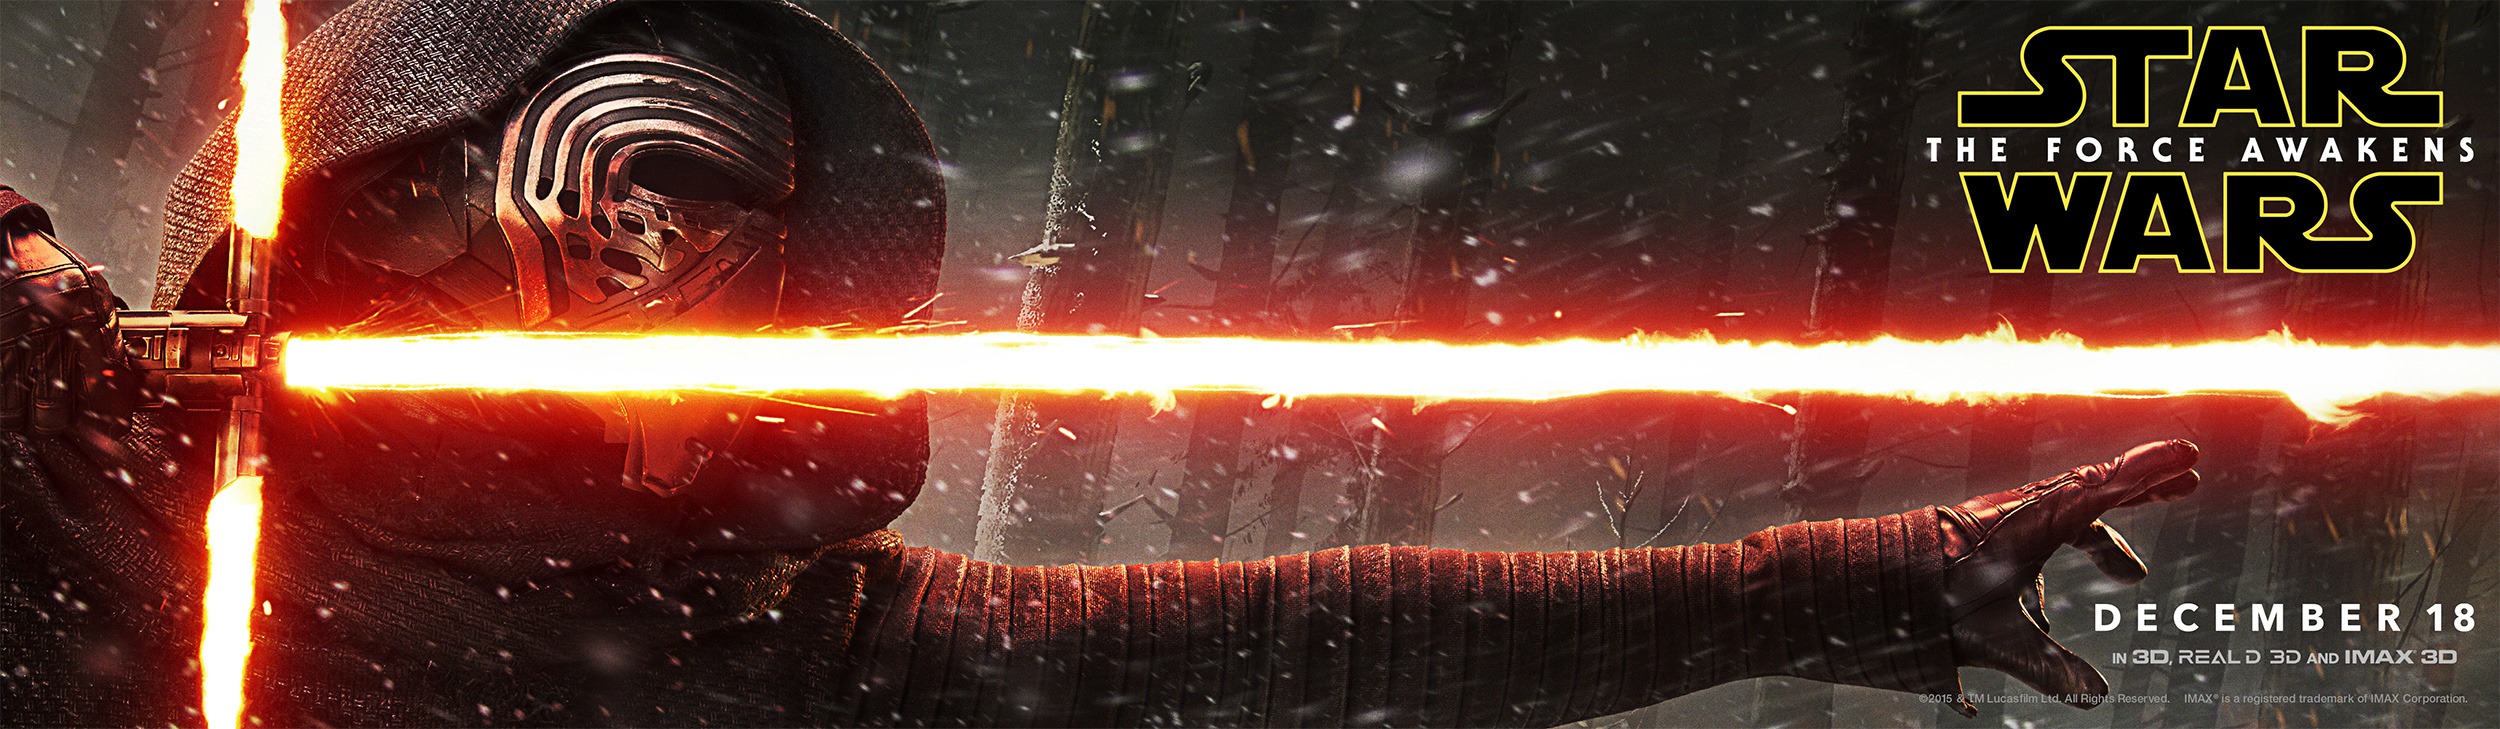 Mega Sized Movie Poster Image for Star Wars: The Force Awakens (#29 of 29)